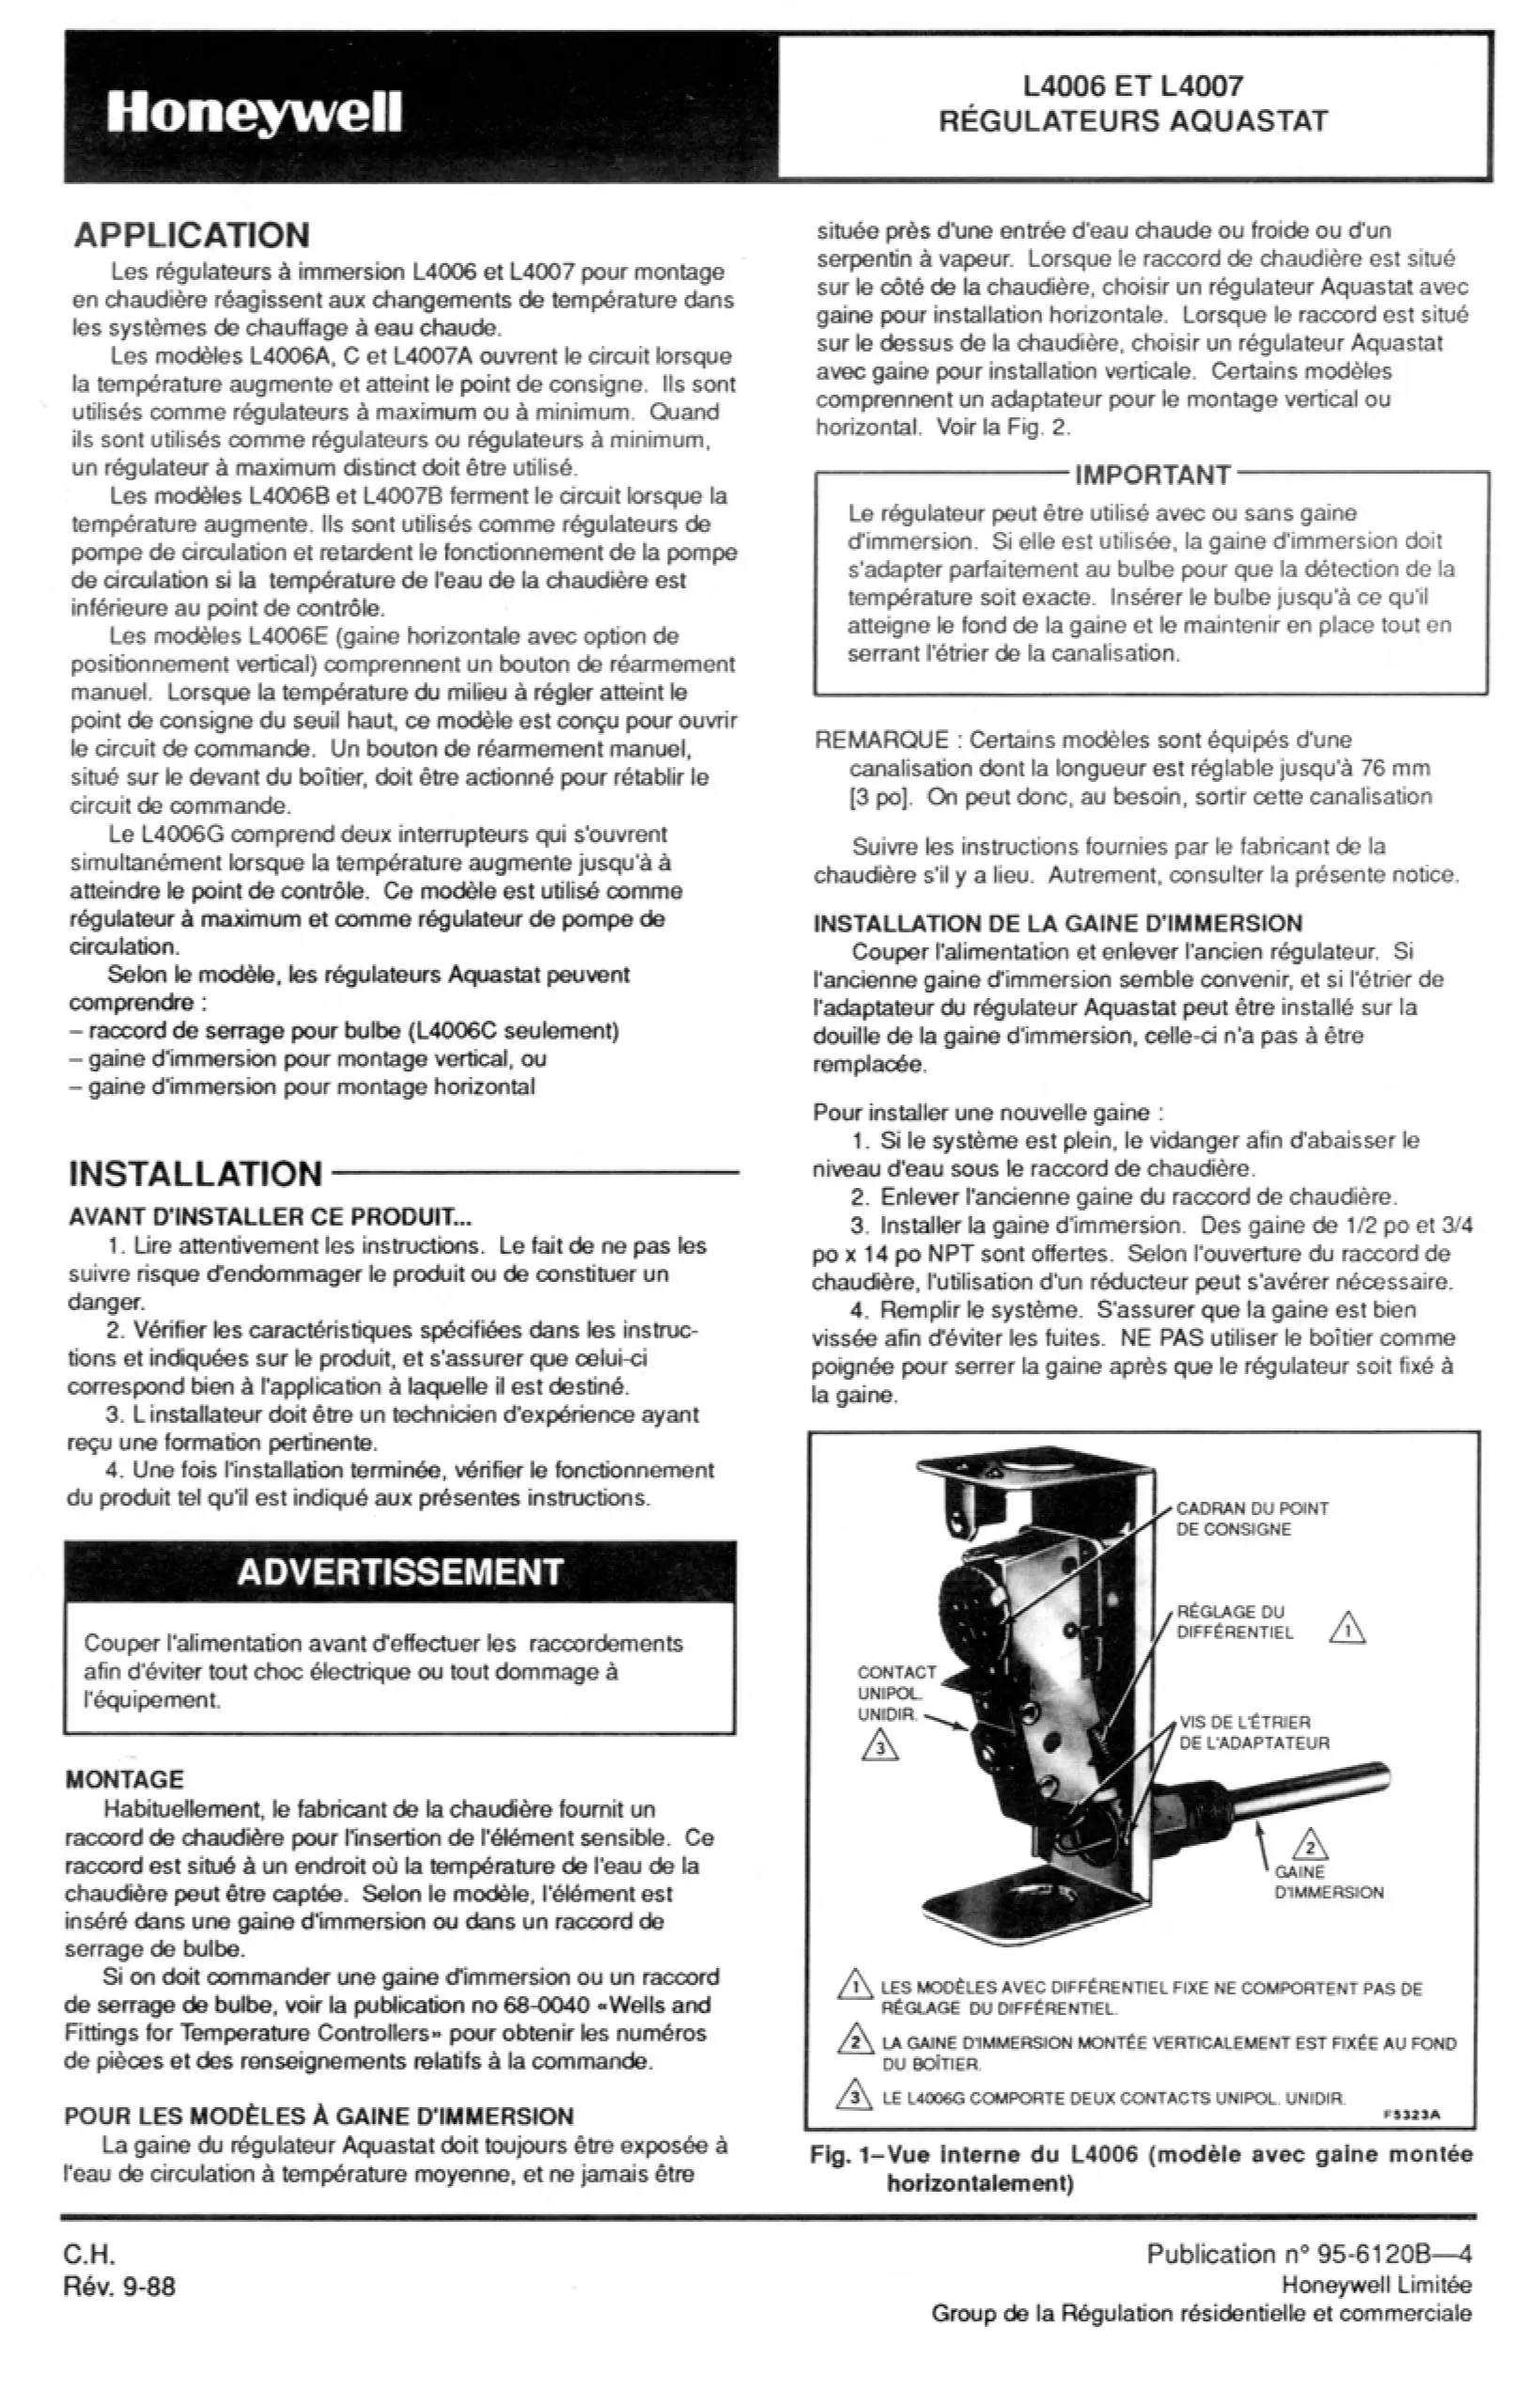 Honeywell technical document french translation example